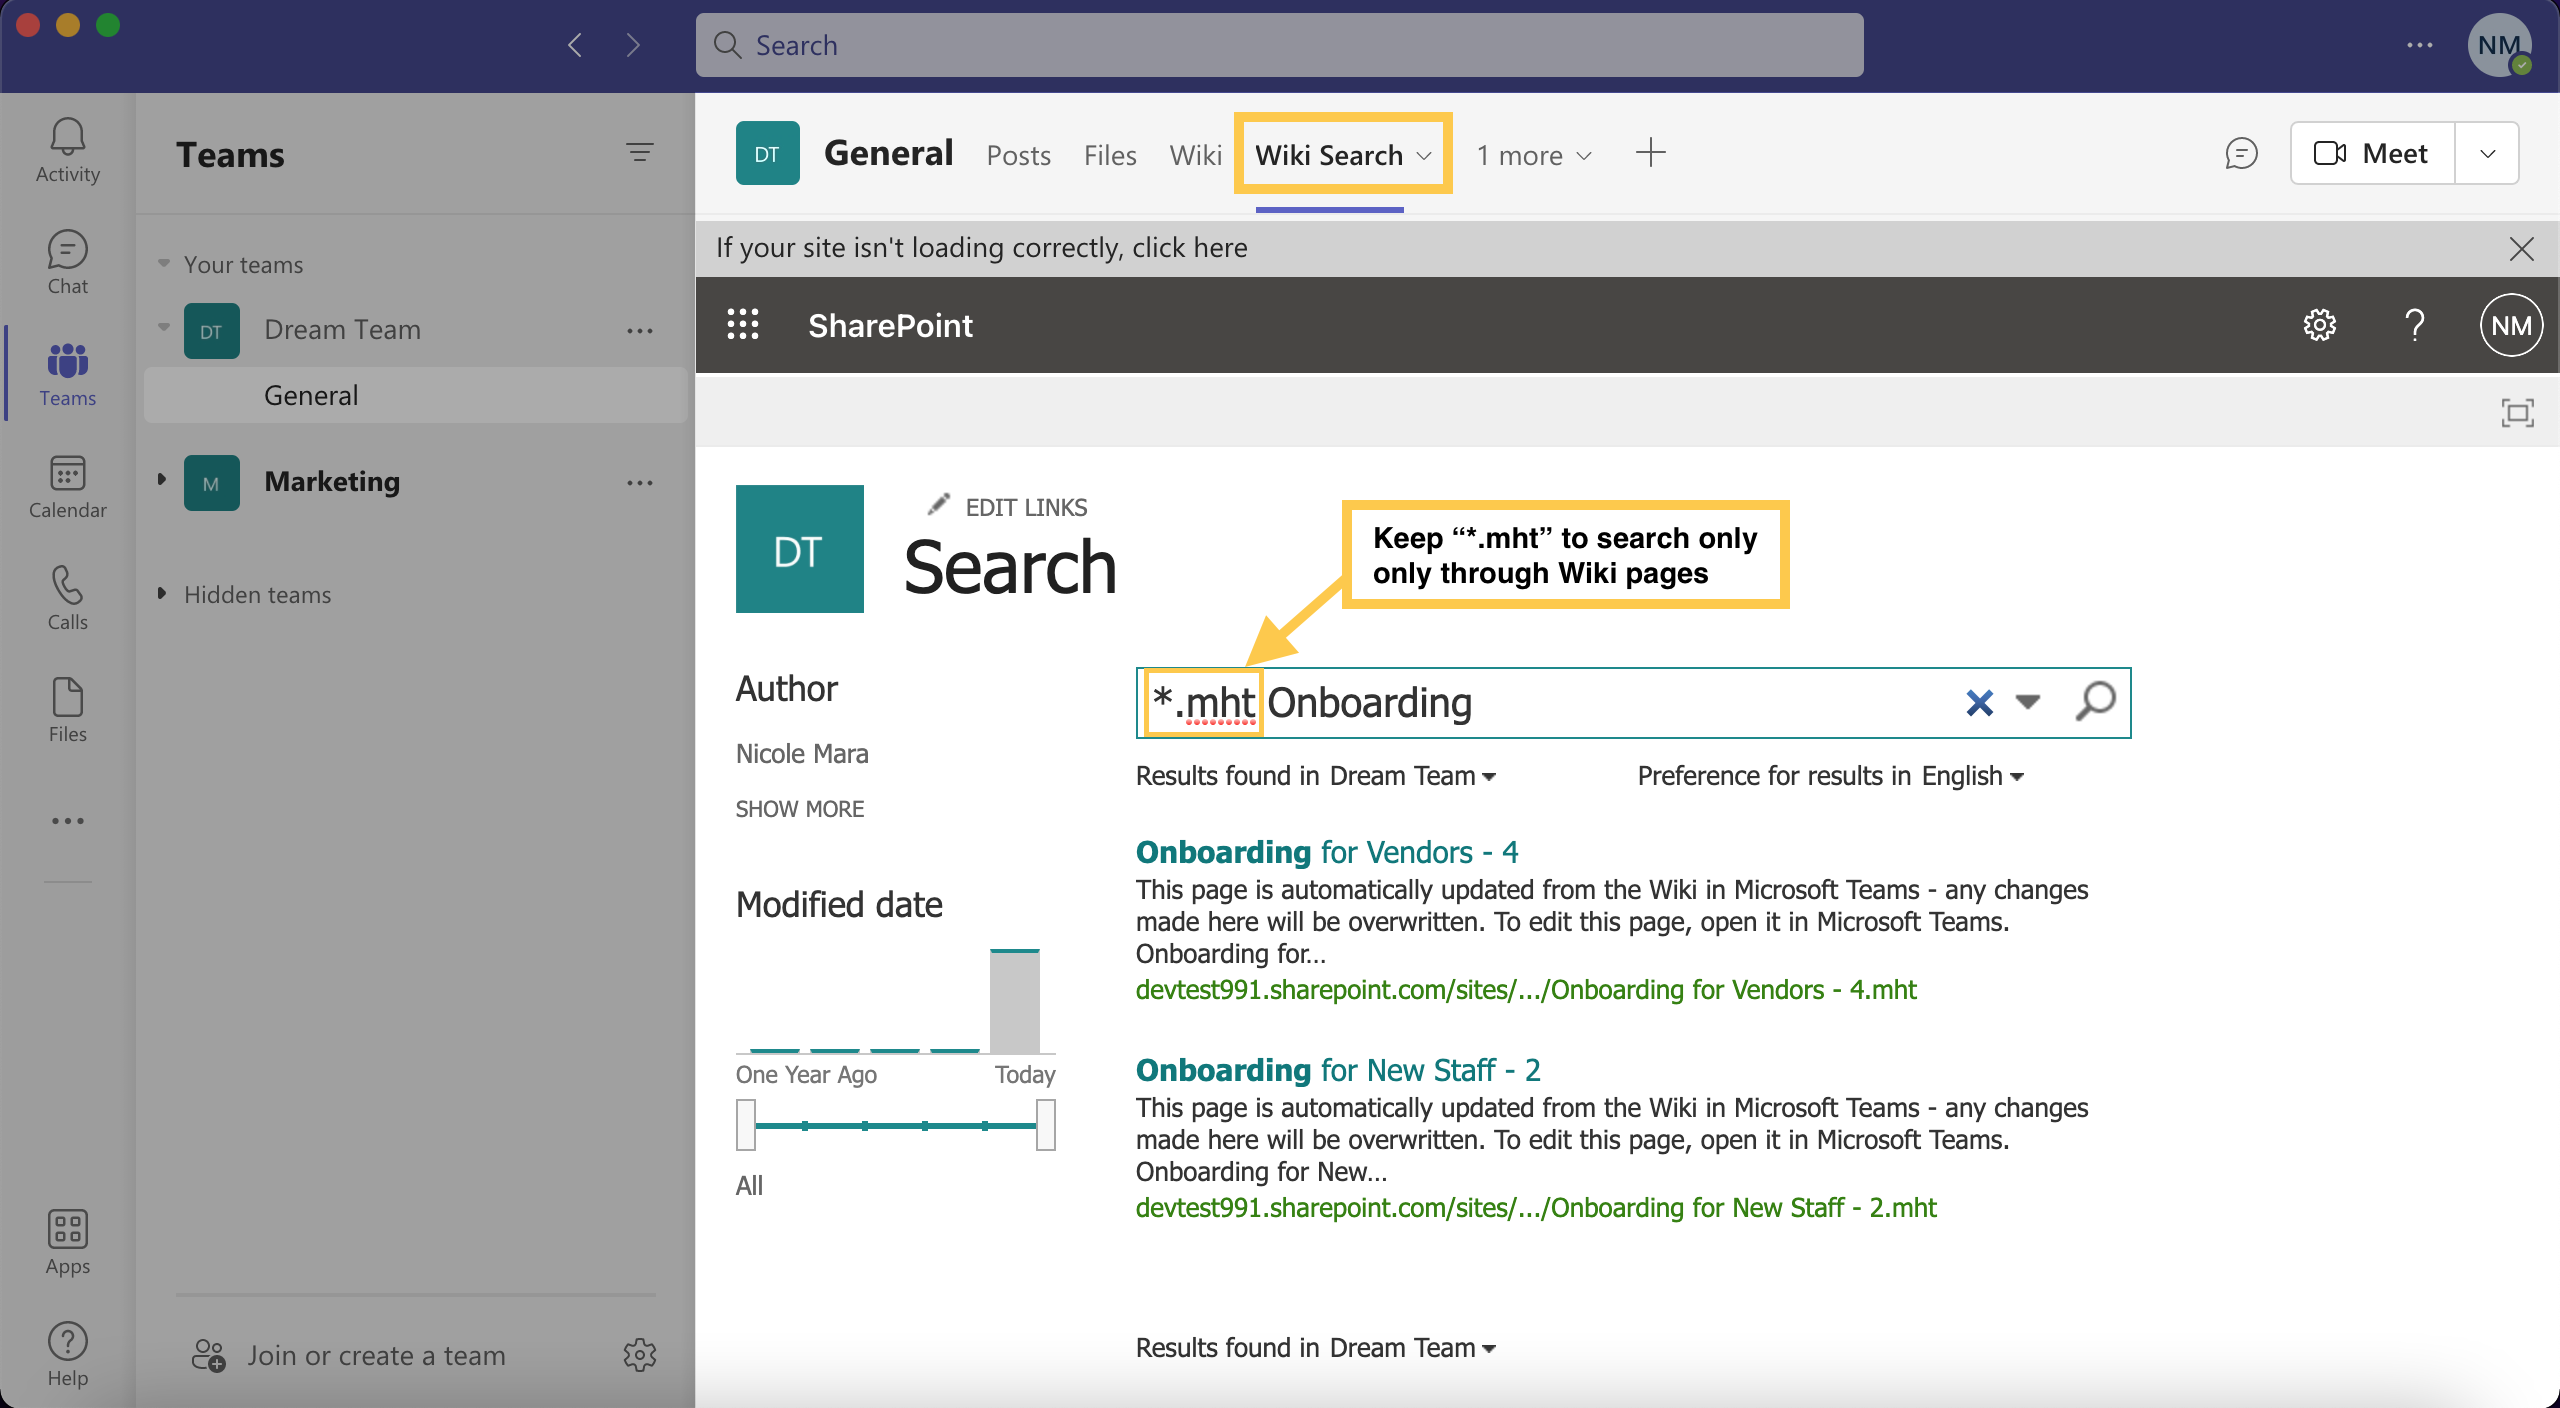 Guide How to Search Through Microsoft Teams Built-In Wiki